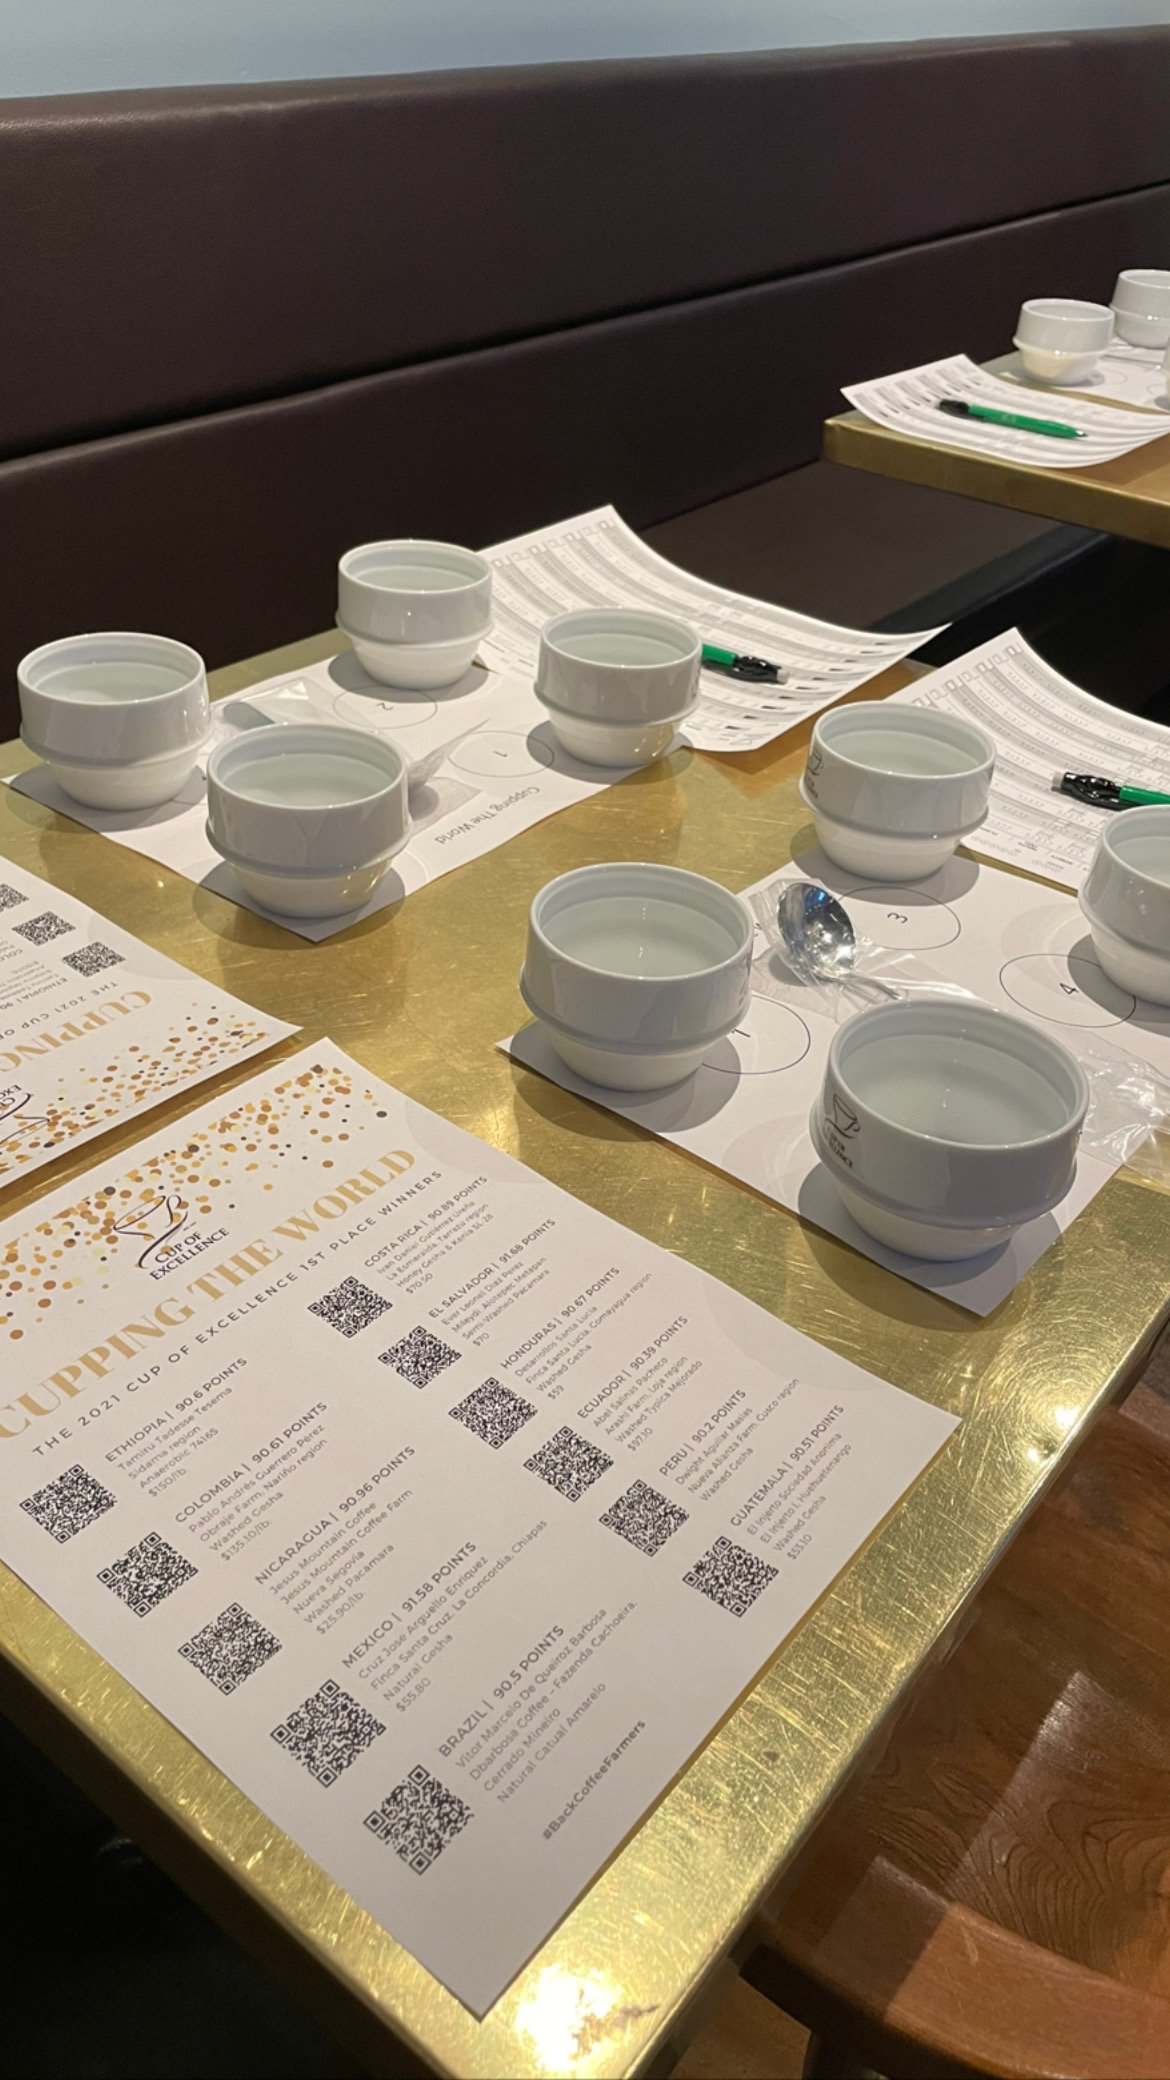 Coffee cupping menu and forms